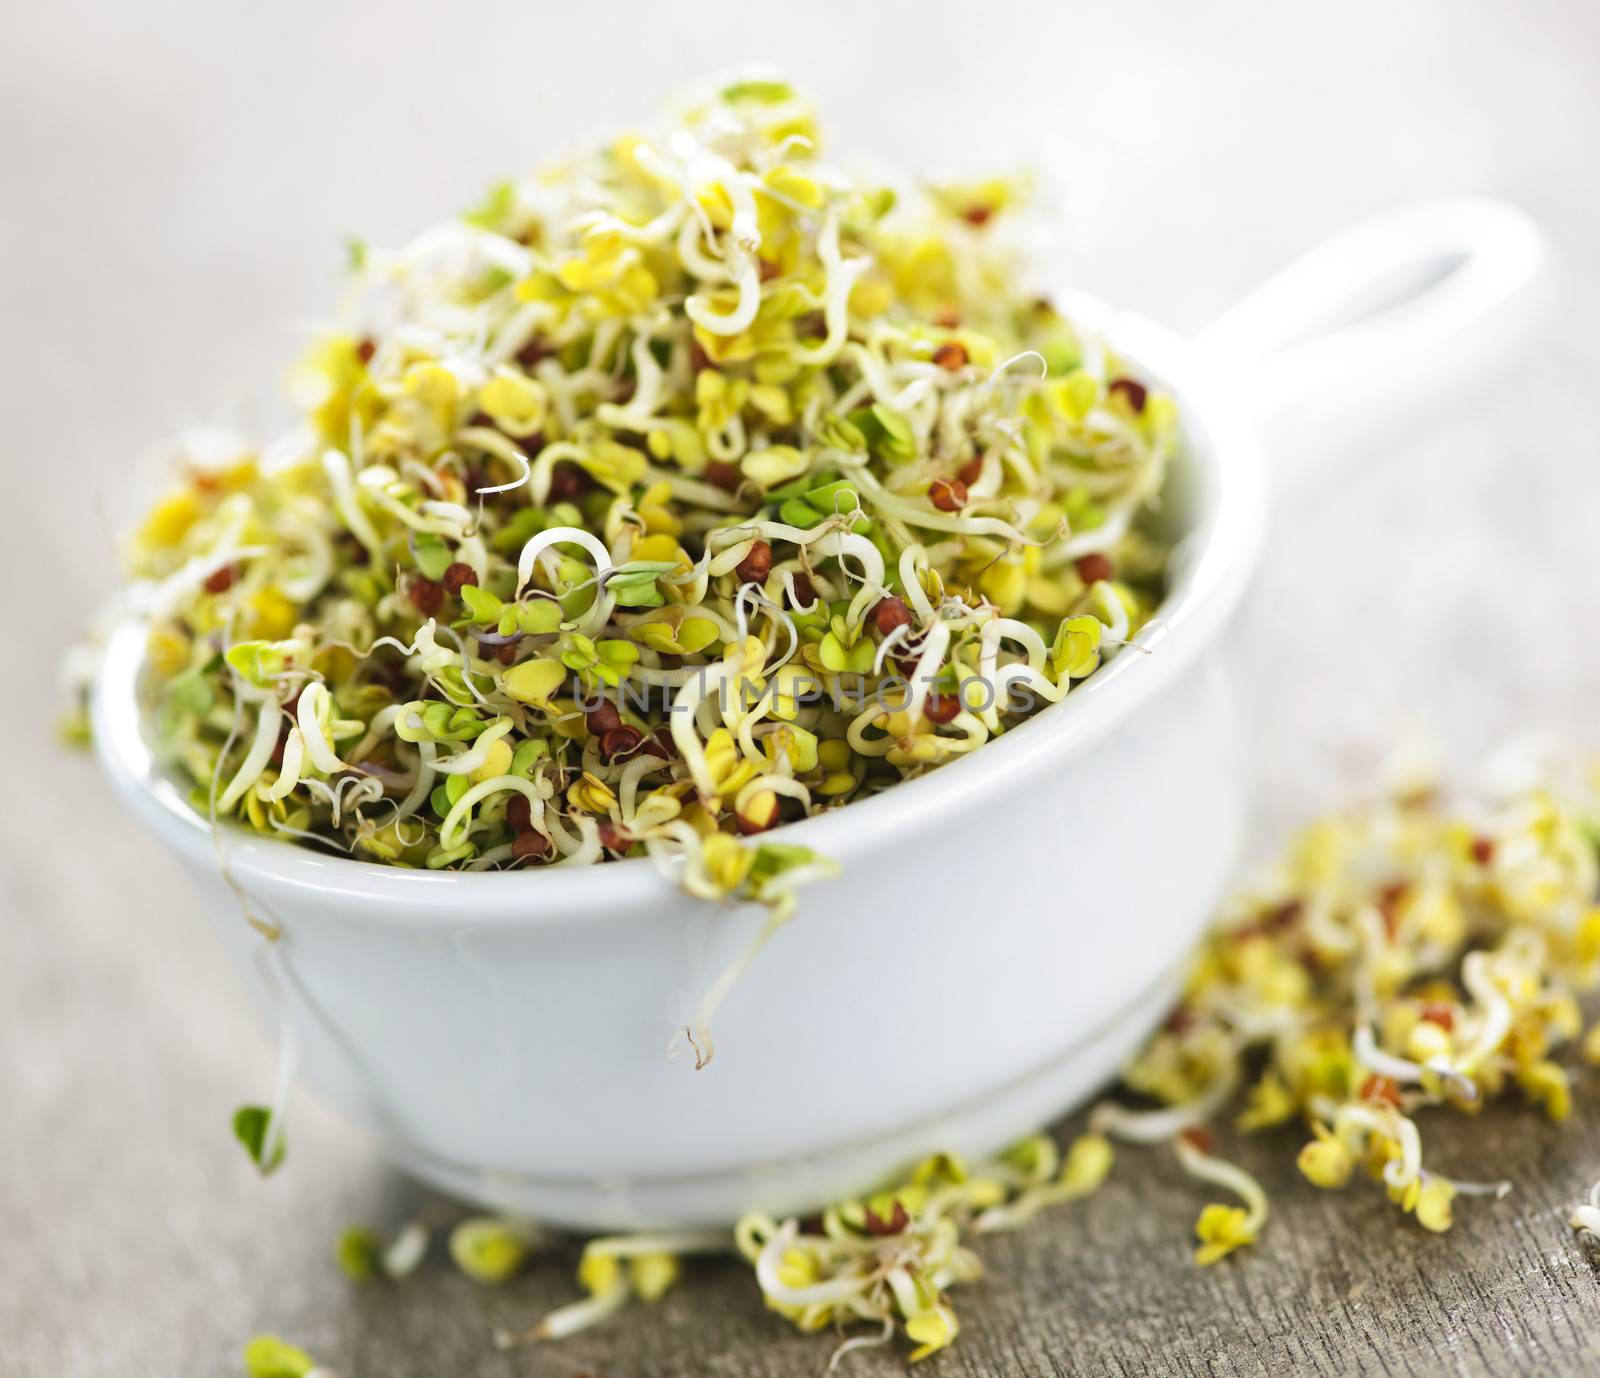 Alfalfa sprouts in a cup by elenathewise